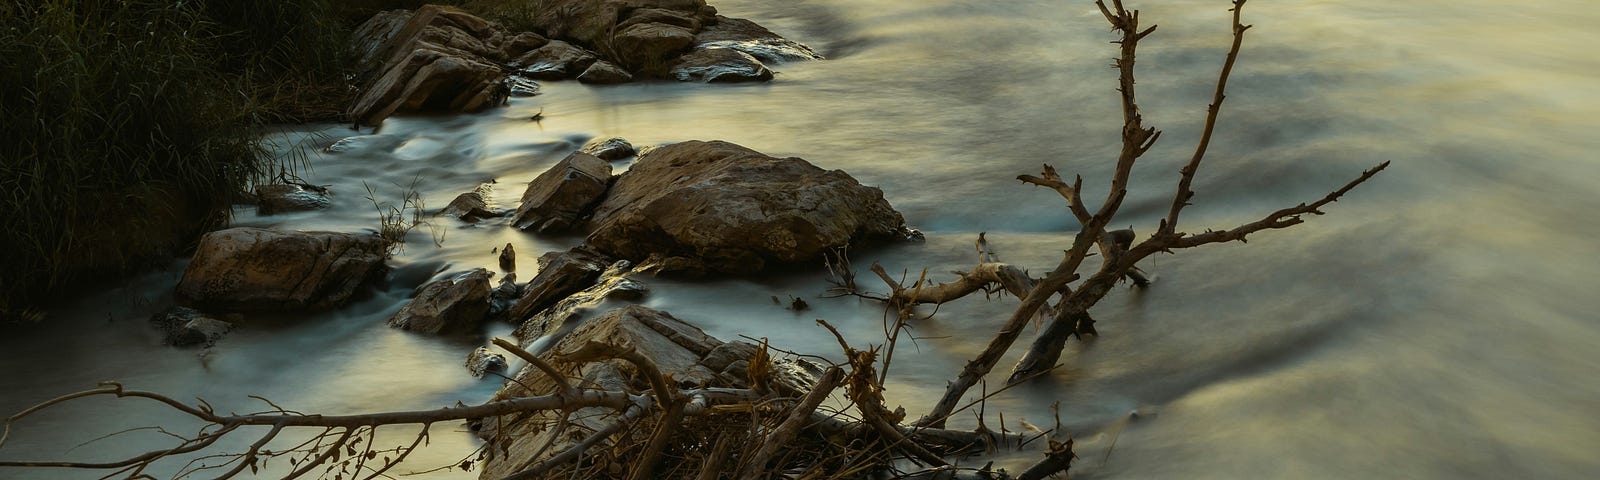 A close-up of natural debris caught in a river by dawn.